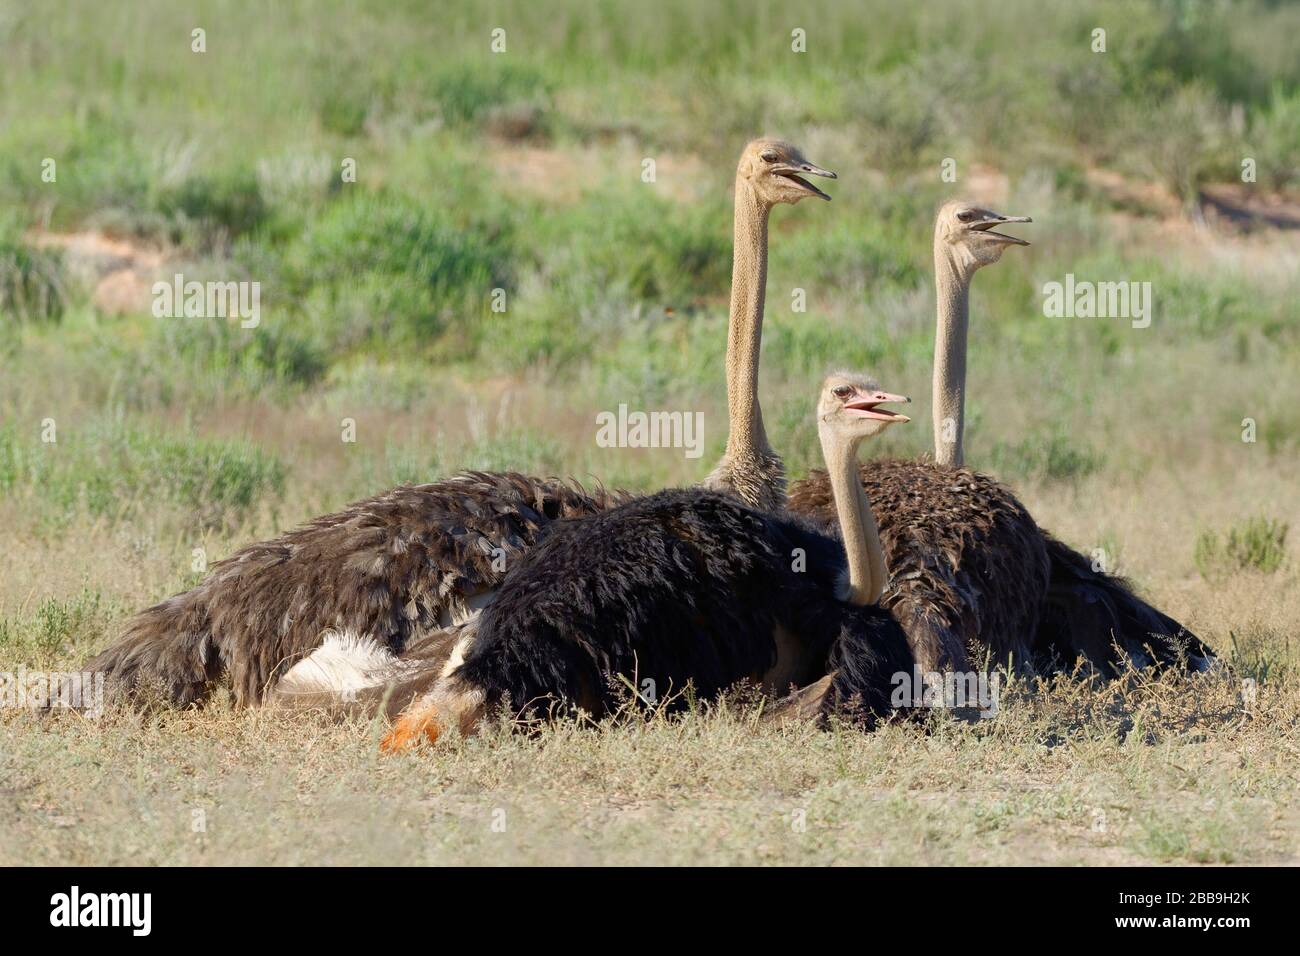 Common ostriches (Struthio camelus), adults, male and females, resting on sandy ground, Kgalagadi Transfrontier Park, Northern Cape, South Africa Stock Photo